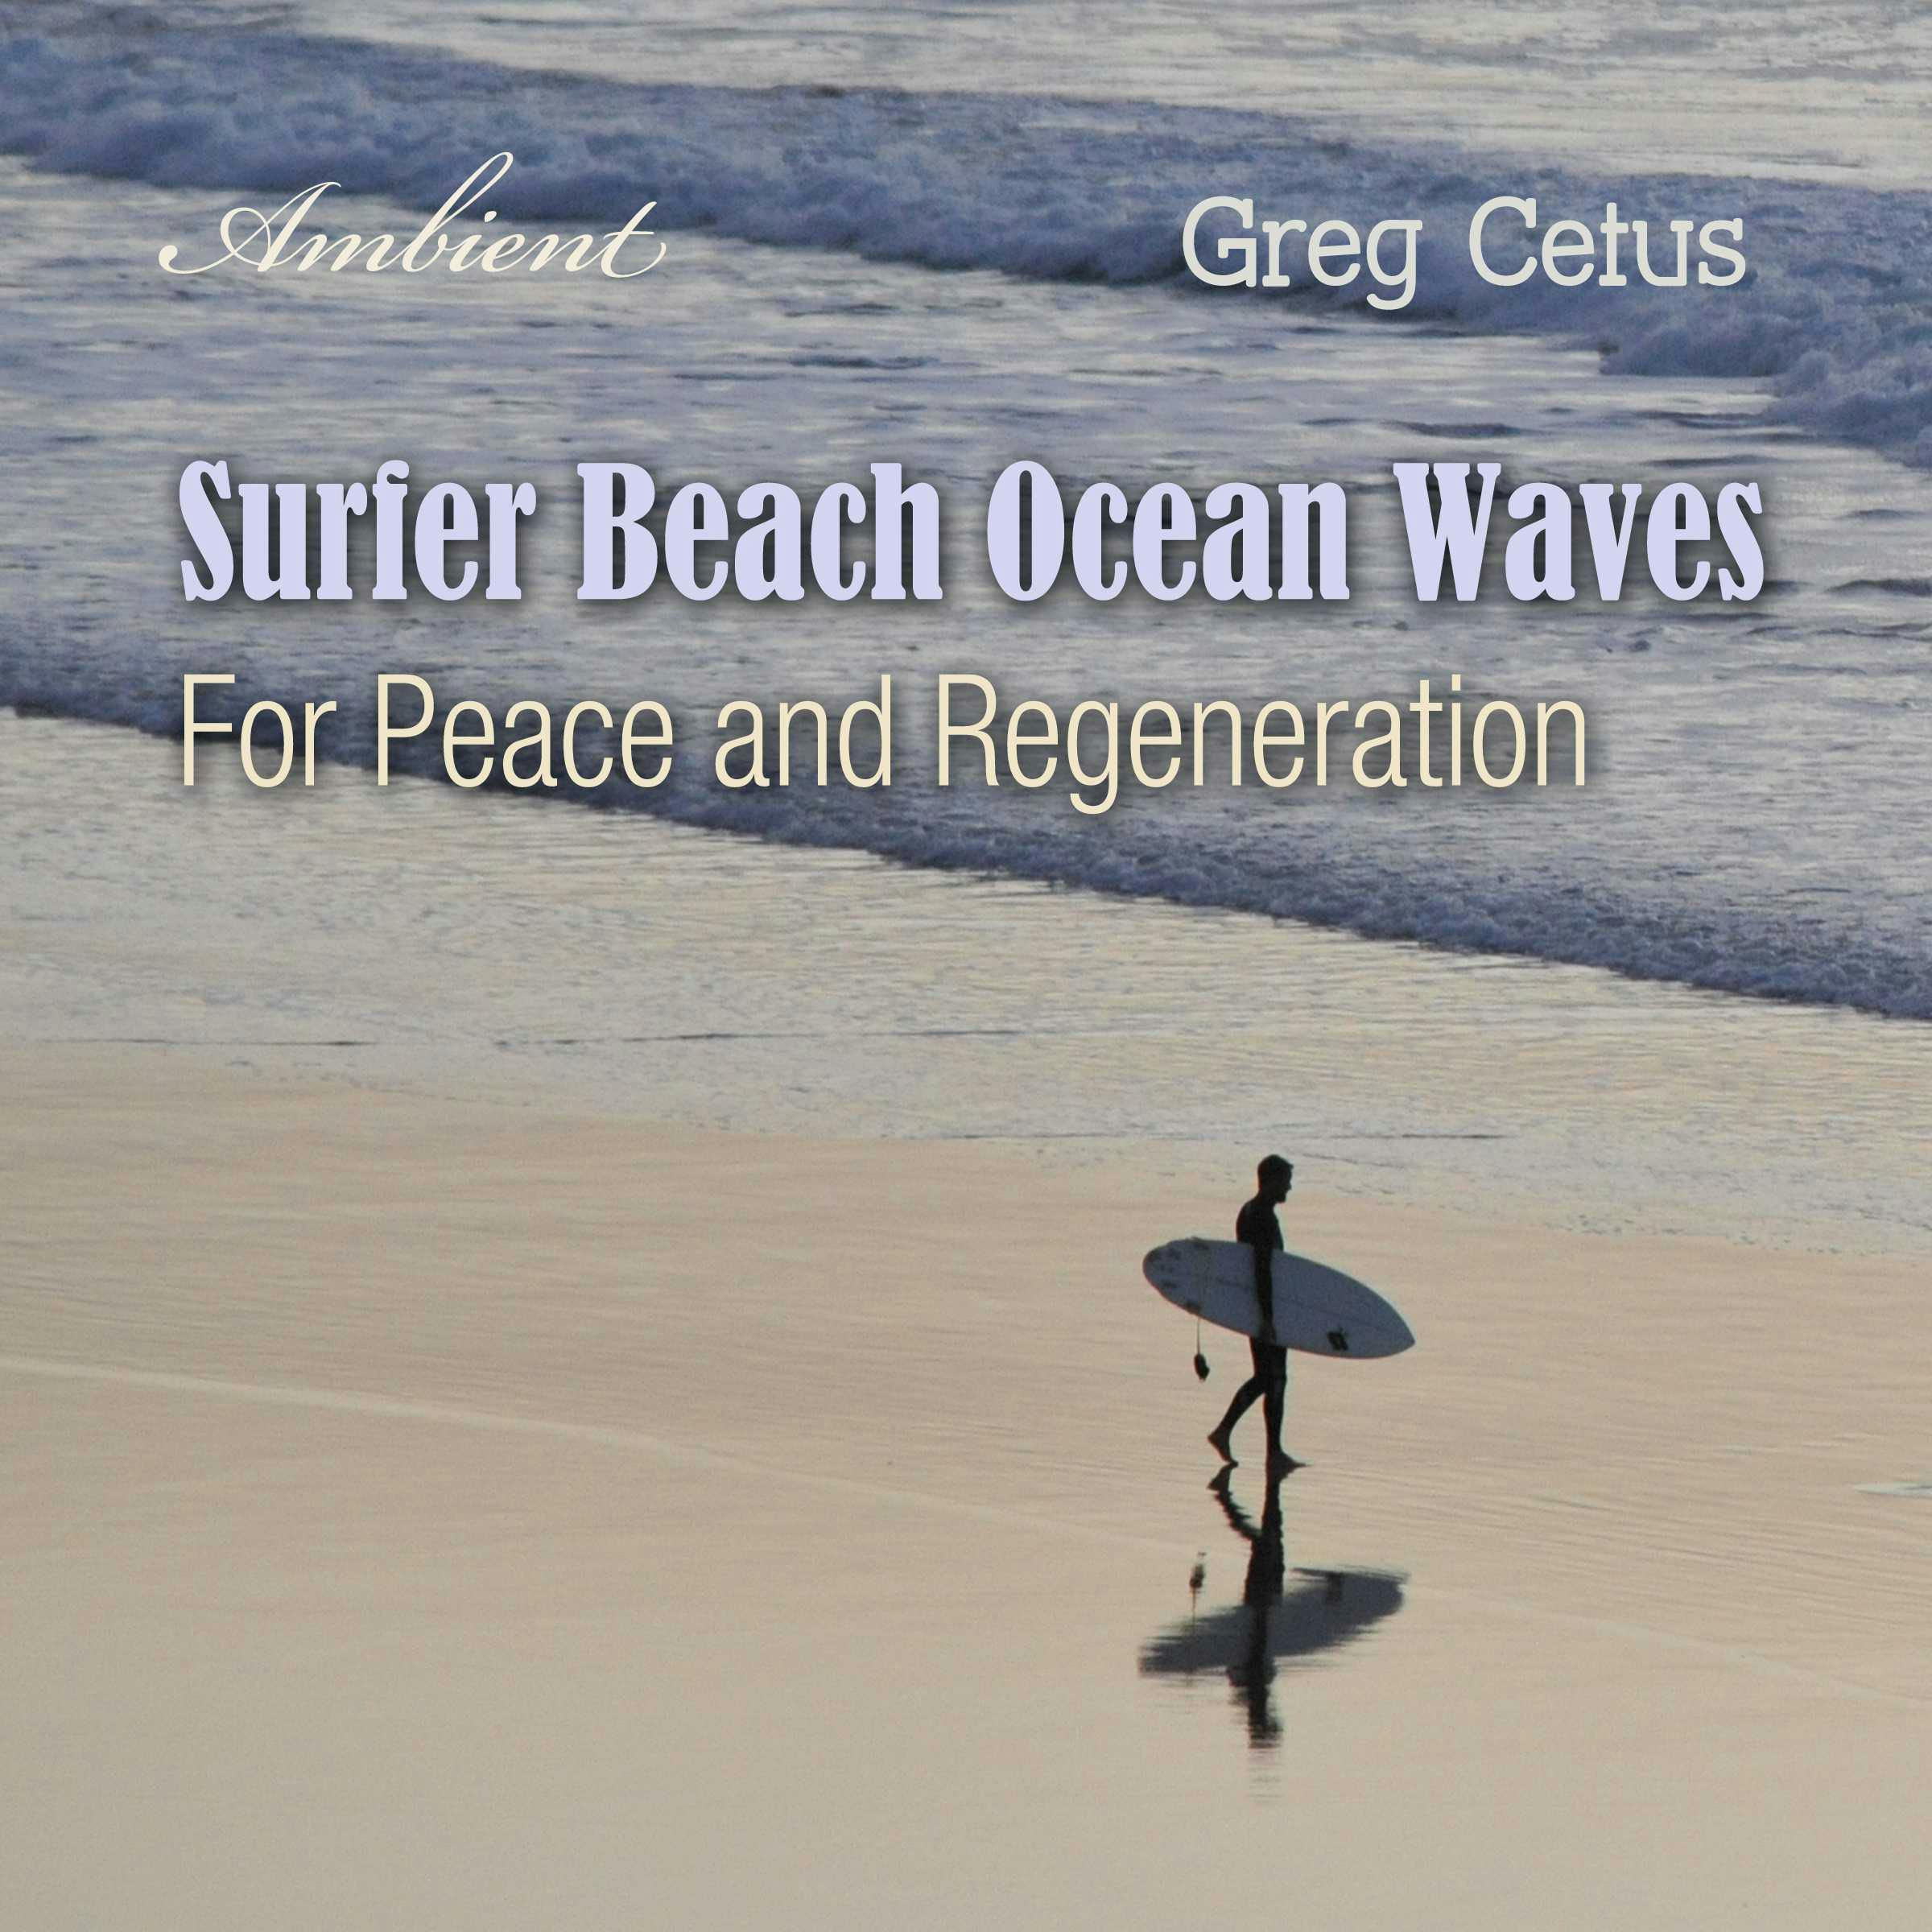 Surfer Beach Ocean Waves: For Peace and Regeneration - Greg Cetus